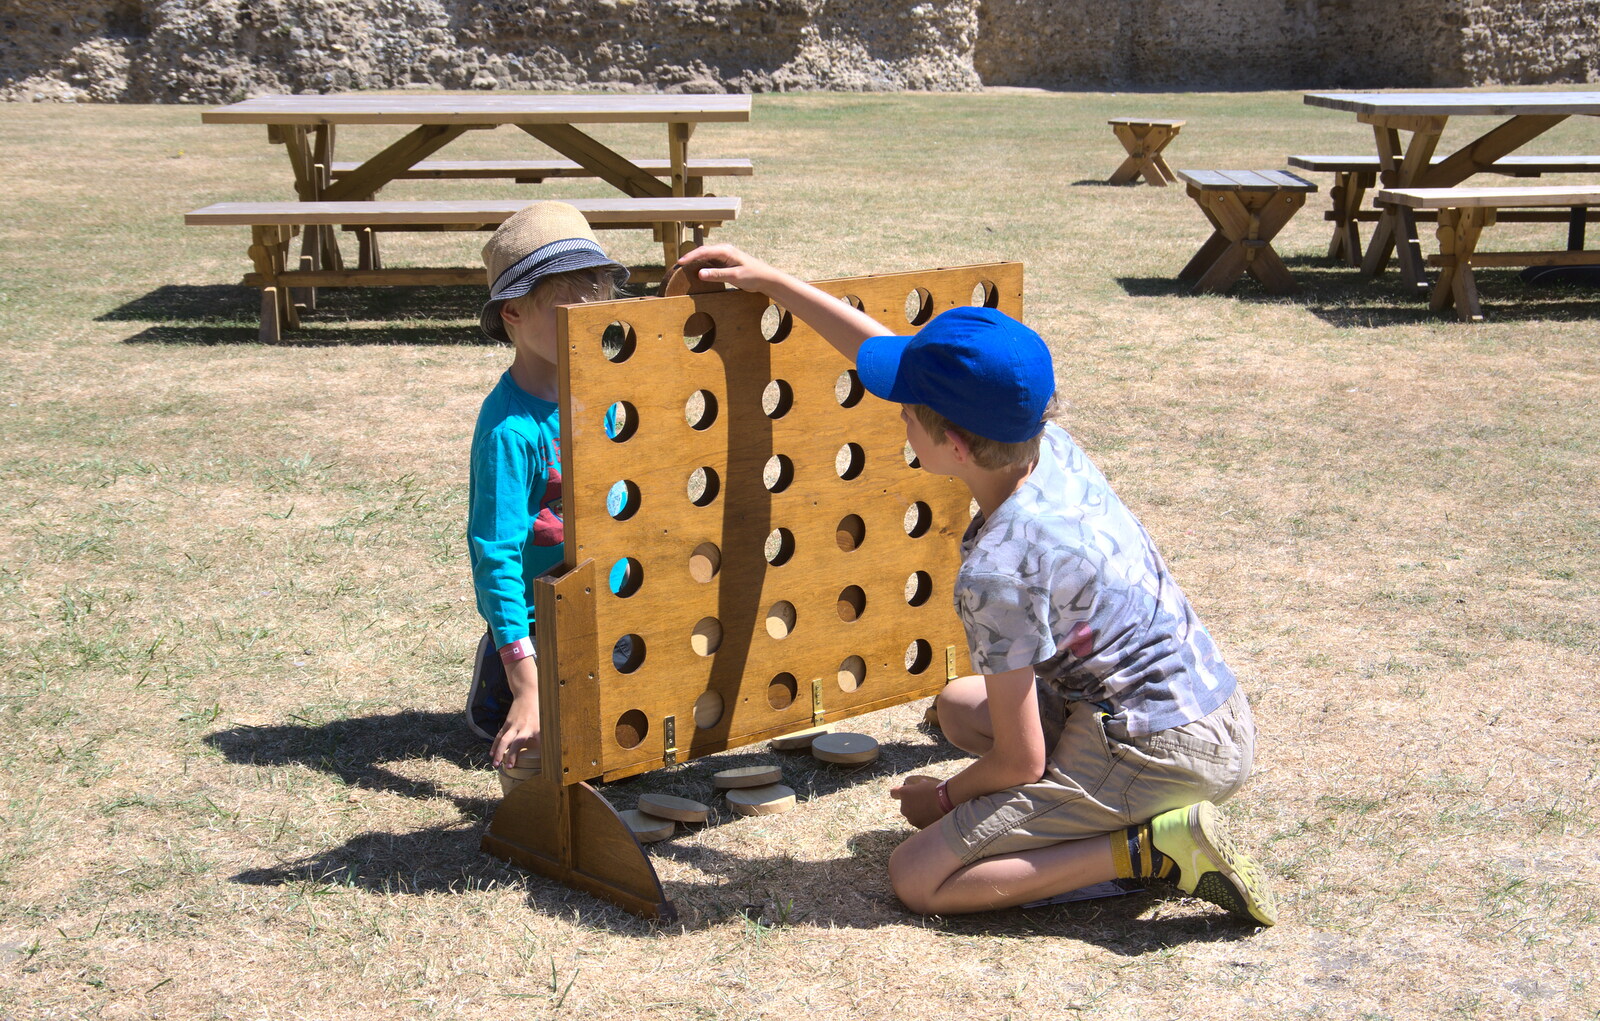 Fred makes his move in Connect 4 from A Postcard from the Castle on the Hill, Framlingham, Suffolk - 14th July 2018